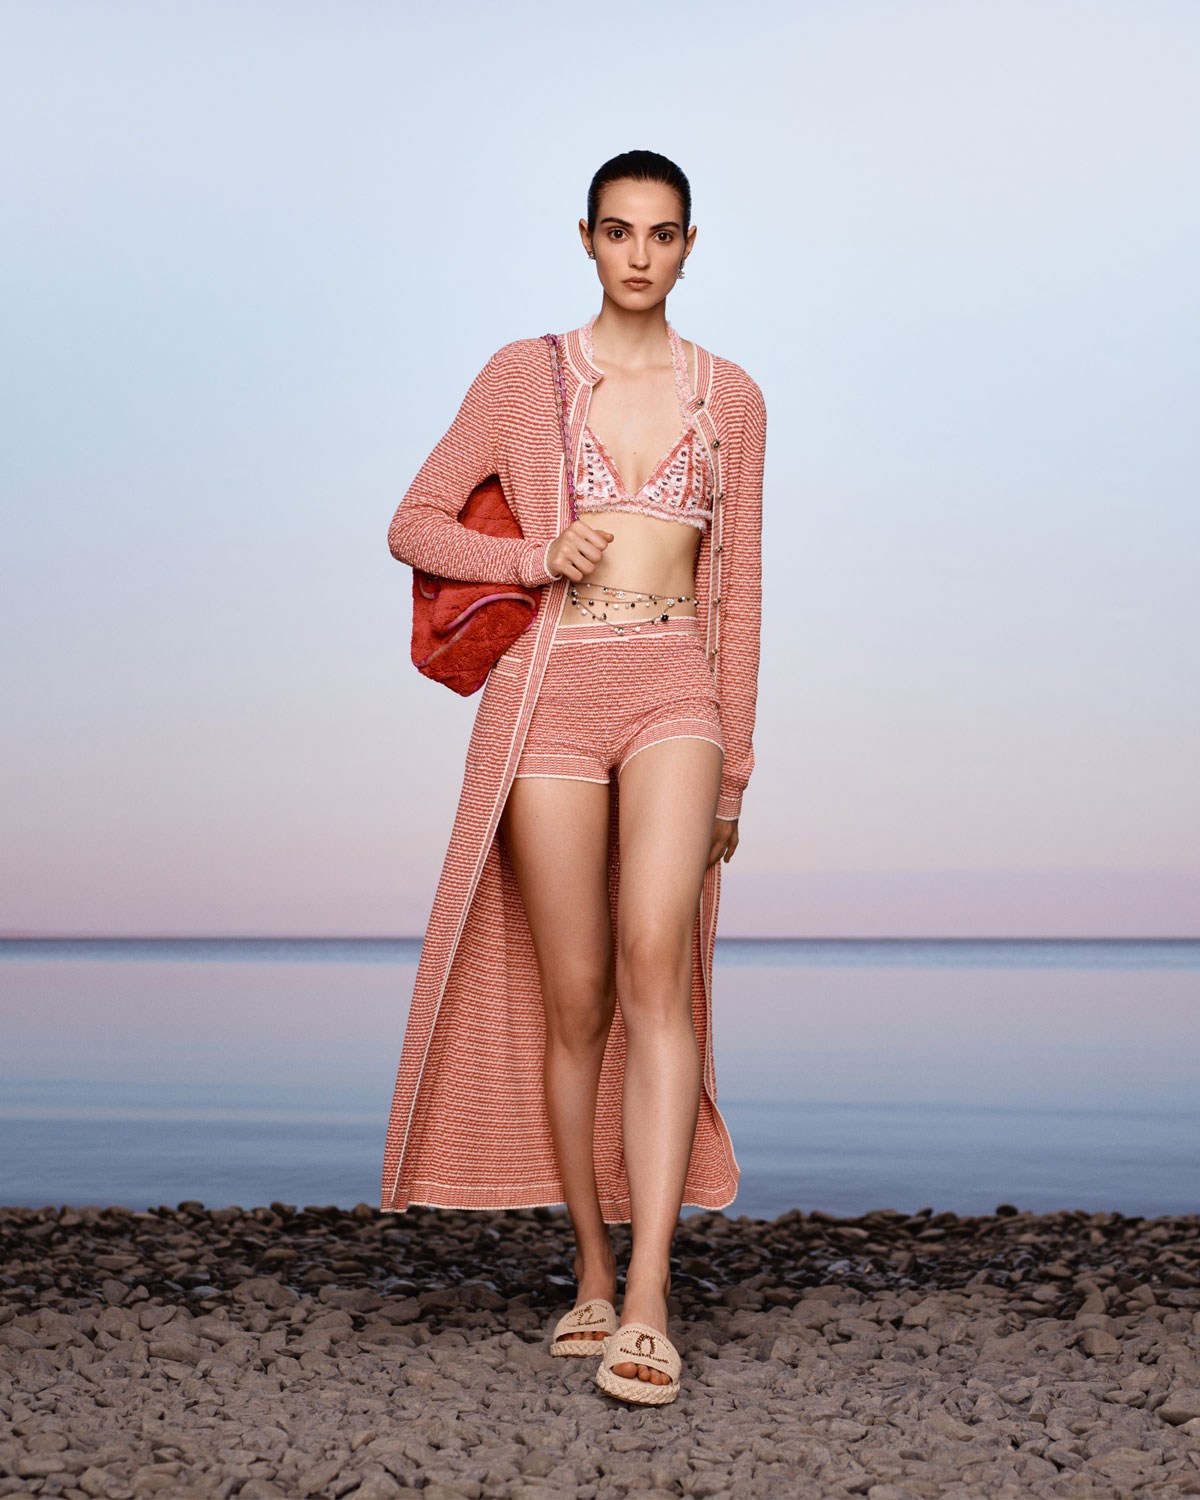 The Chanel Cruise 2020/21 Collection Is Island Holiday Chic